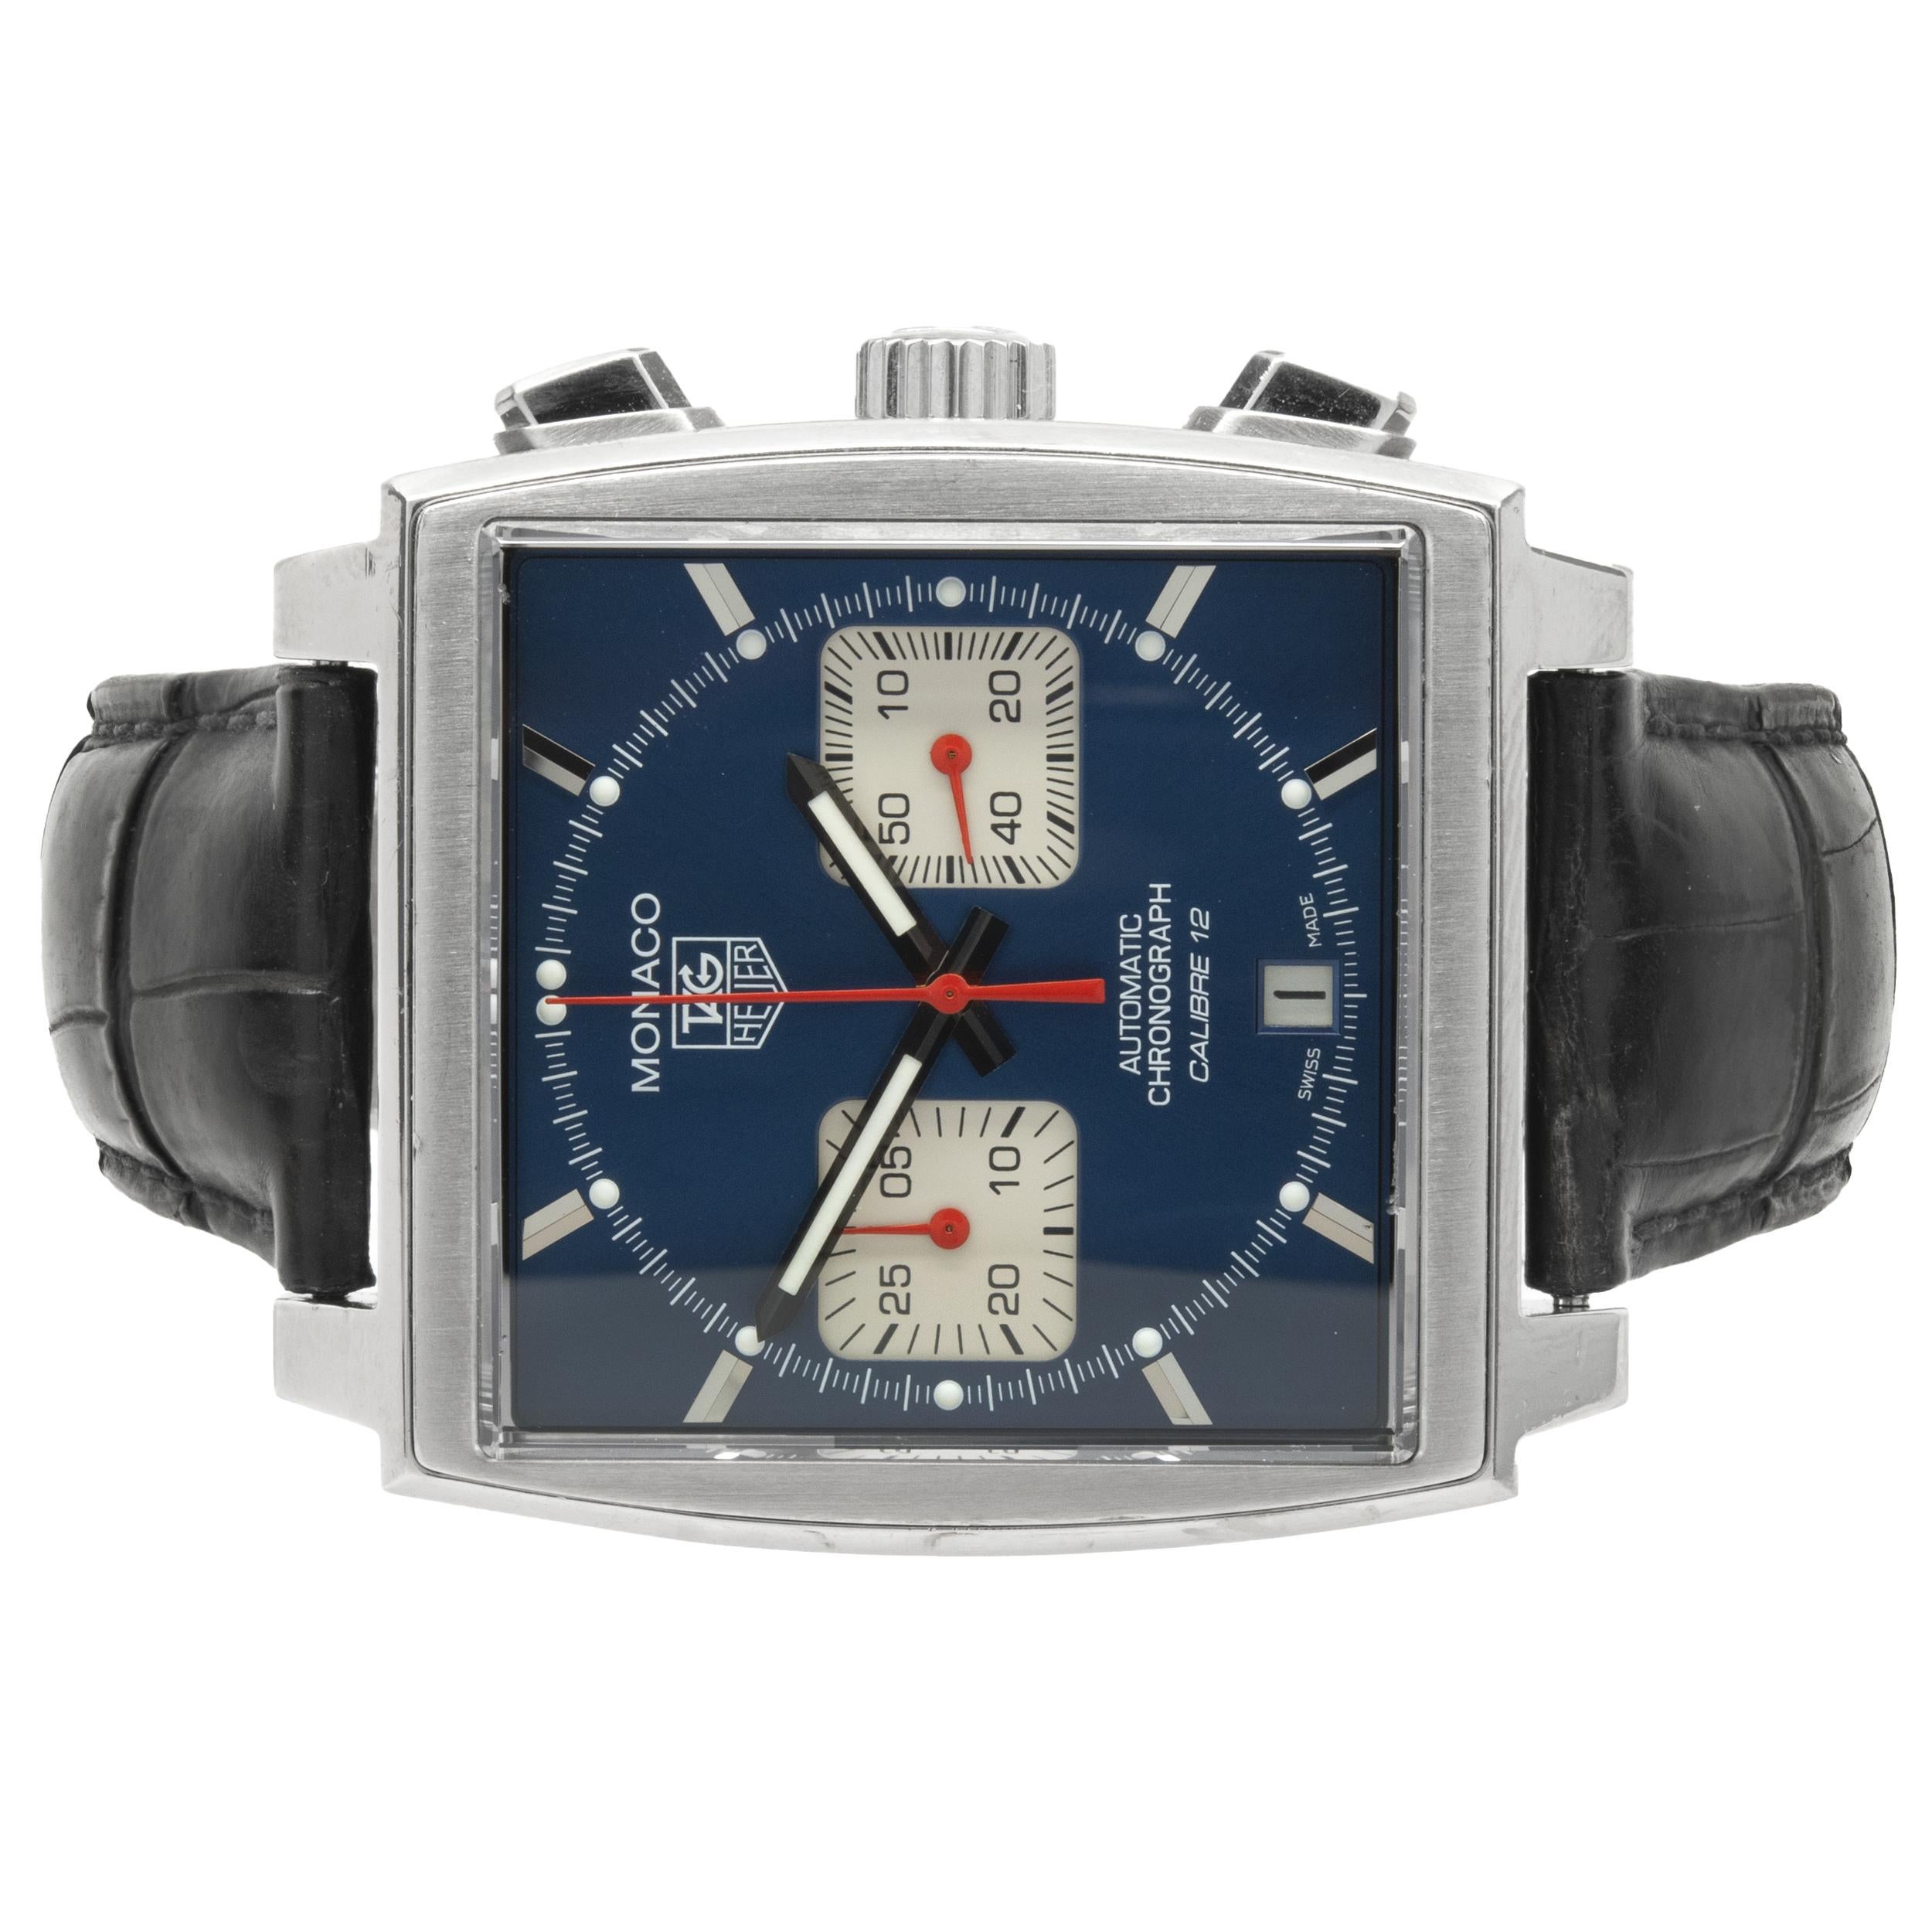 Movement: automatic
Function: hours, minutes, seconds, date
Case: 39 X 39mm square case, push/pull crown, chronograph 
Dial: blue stick chrono dial
Band: Tag Heuer leather strap, stainless steel deployment clasp
Reference#: CAW2111
Serial #: